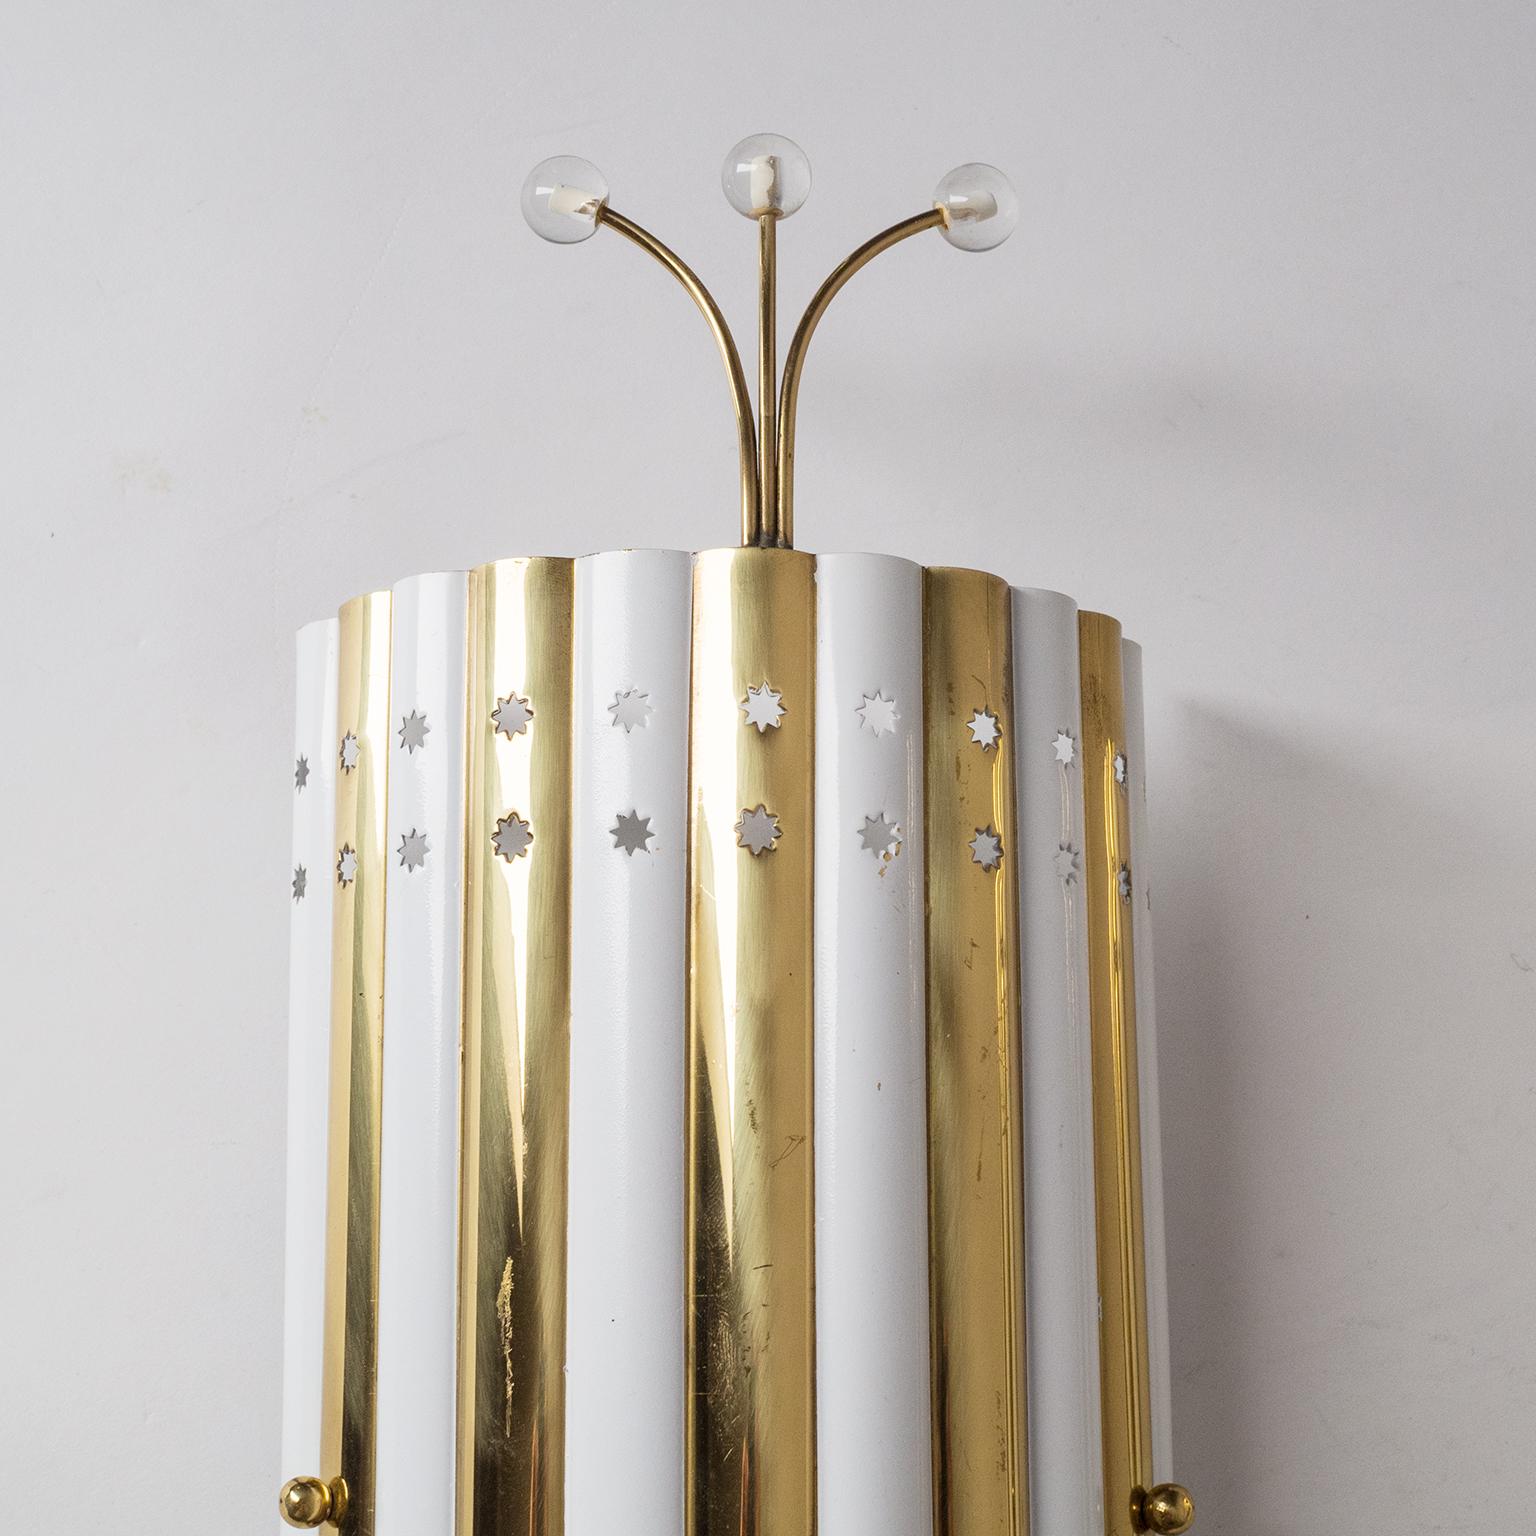 Mid-20th Century Rare Brass and Glass Sconces, 1950s For Sale